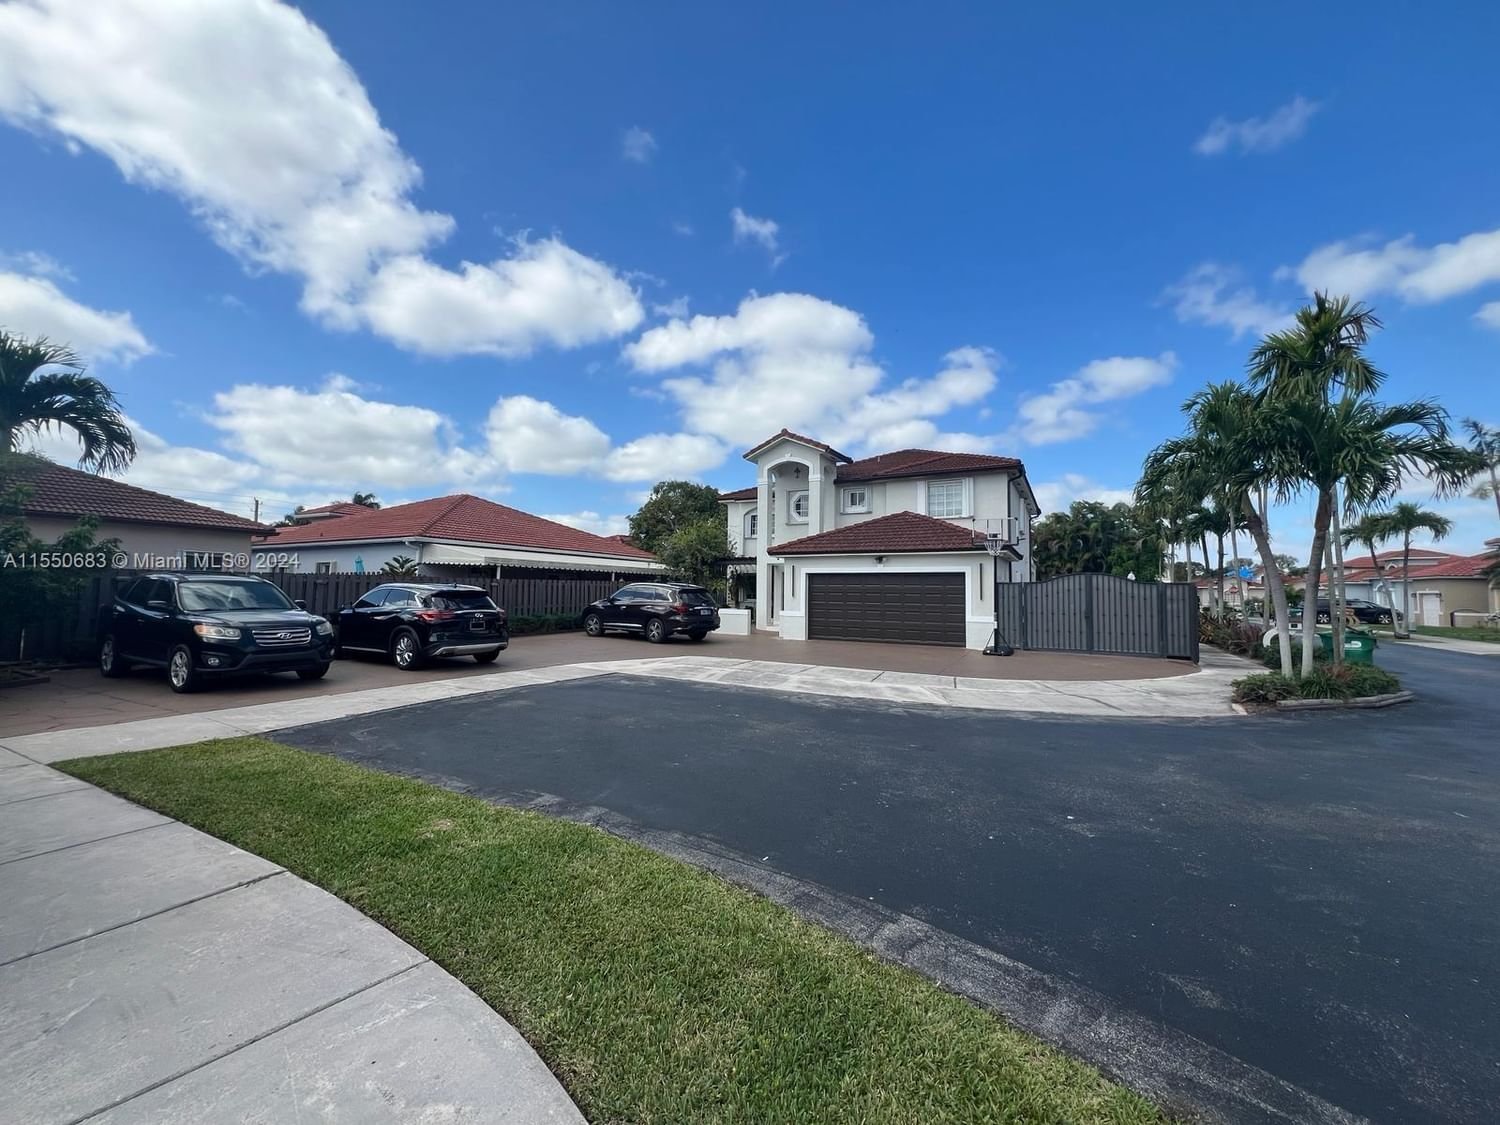 Real estate property located at 16252 55th St, Miami-Dade County, PELICANS POINT A T MILLER, Miami, FL